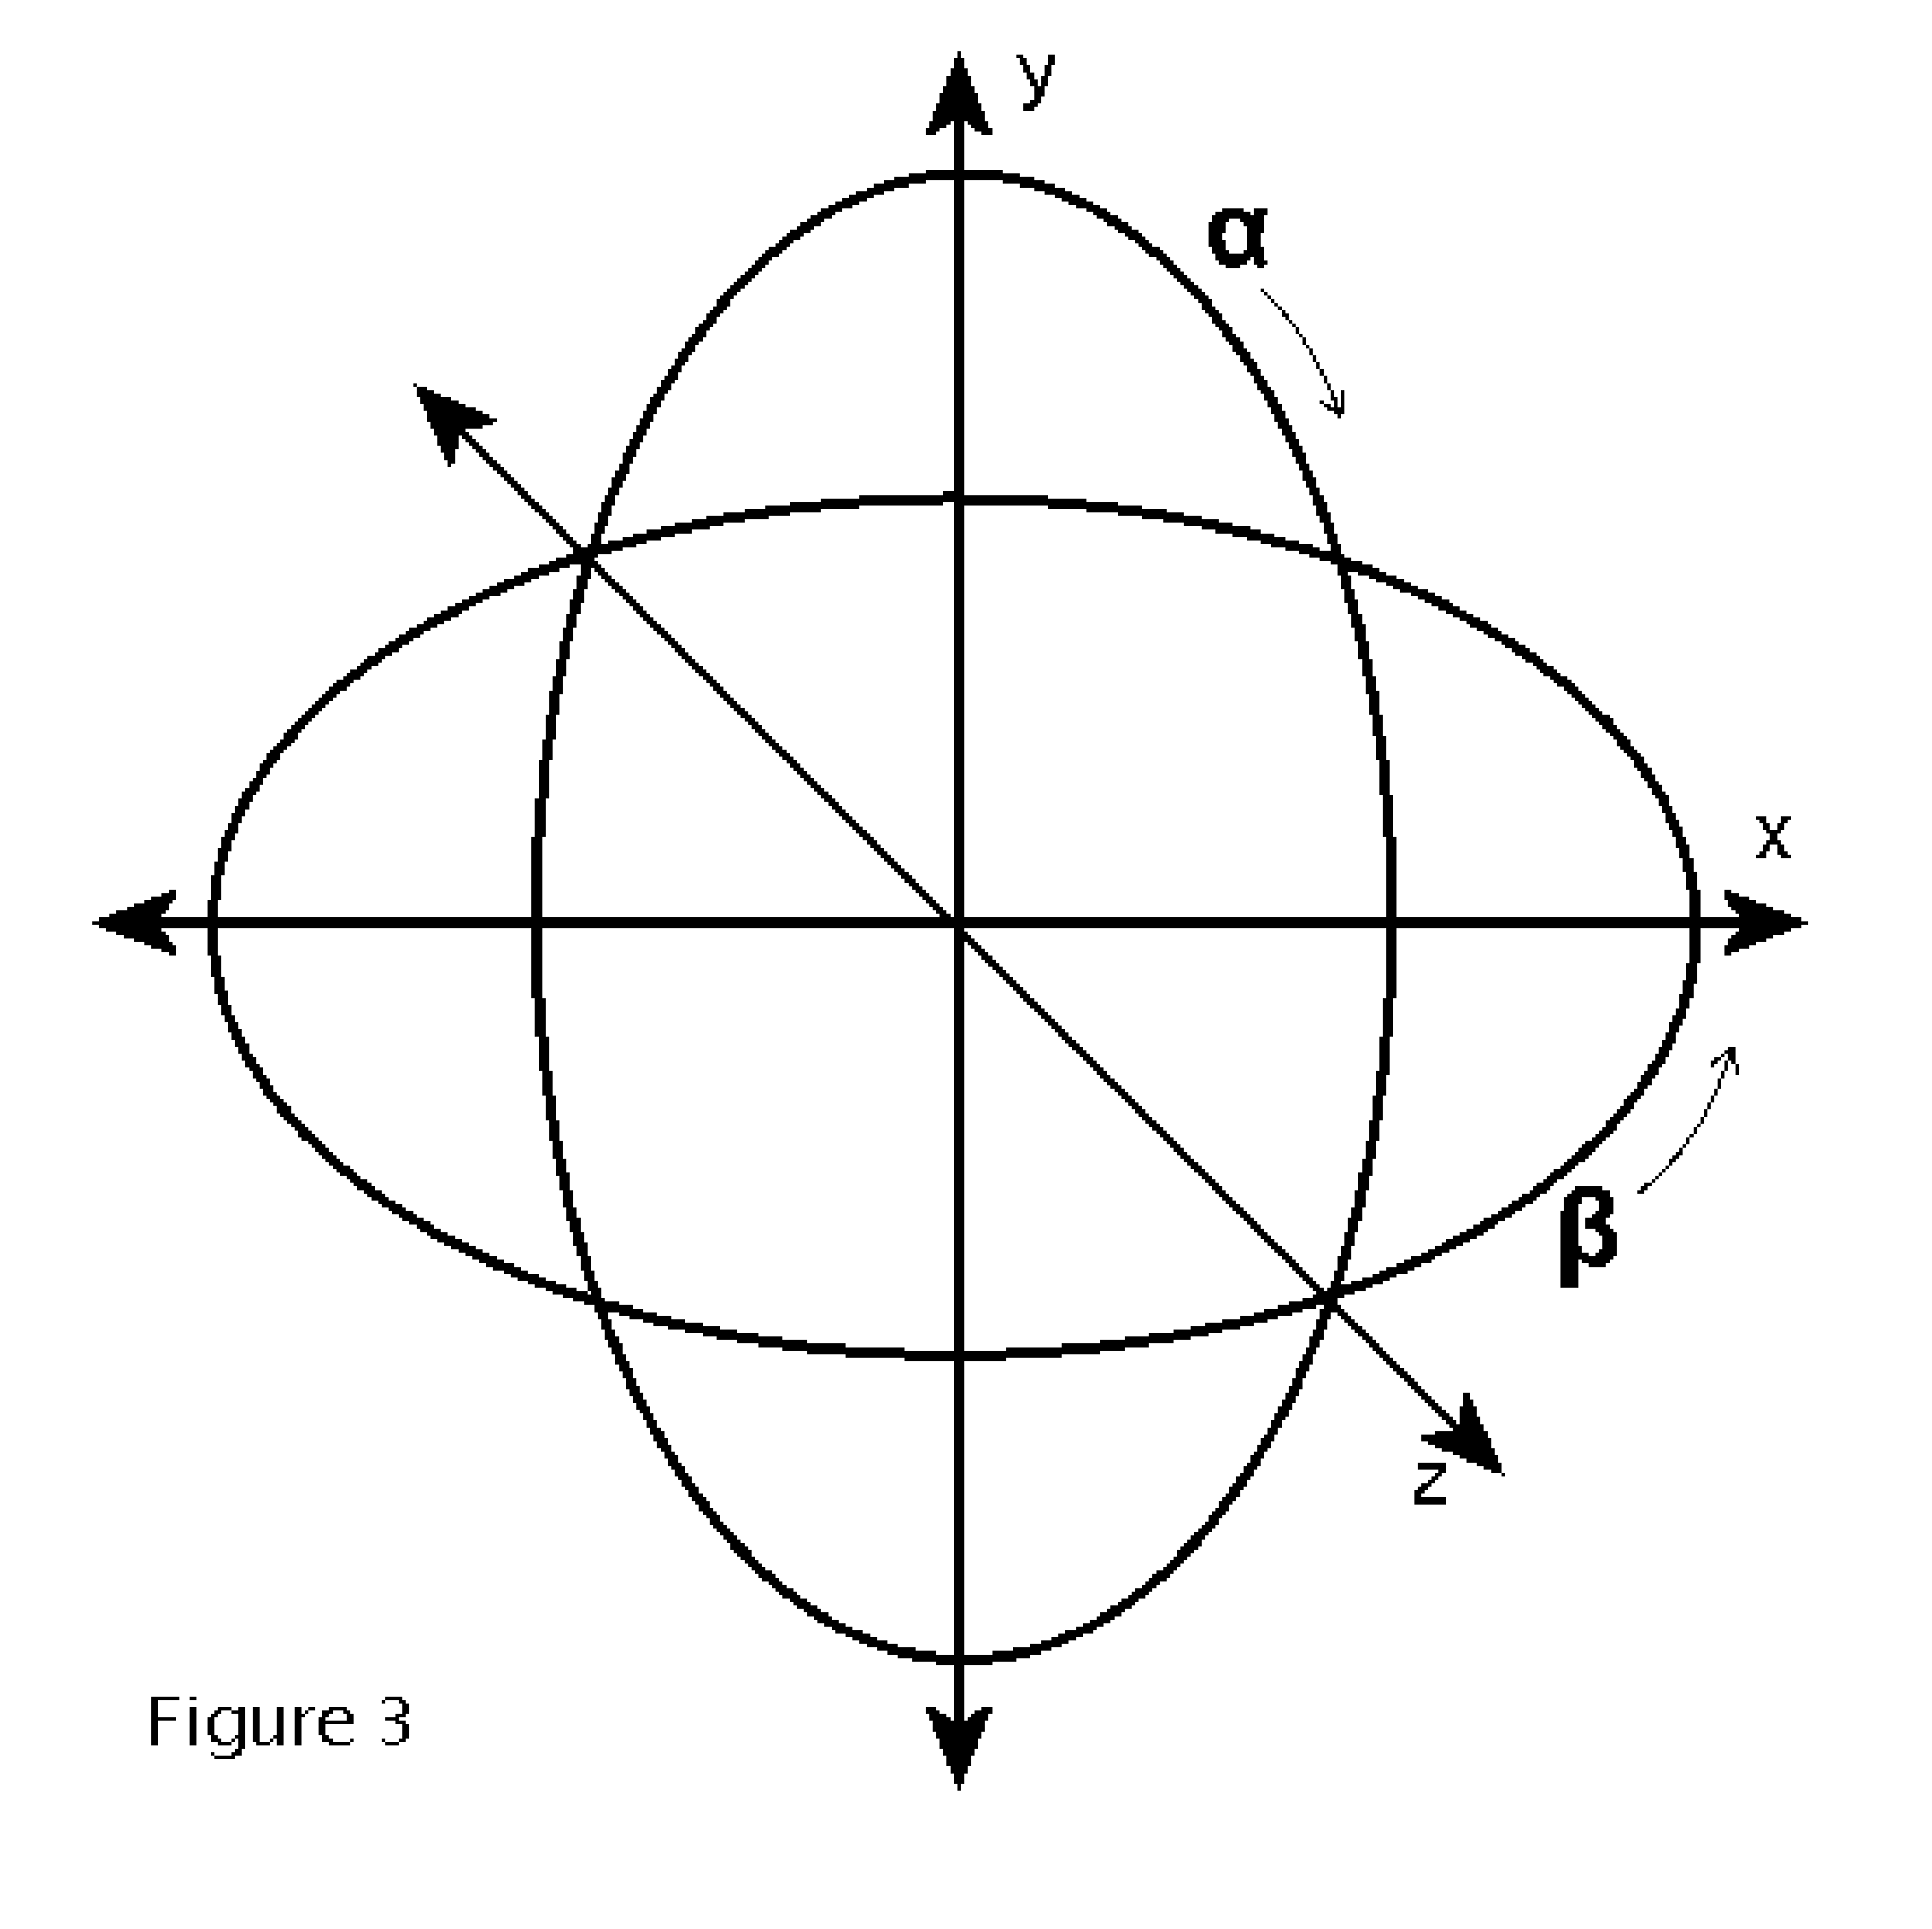 Method for generating dynamic representations for visual tests to distinguish between humans and computers